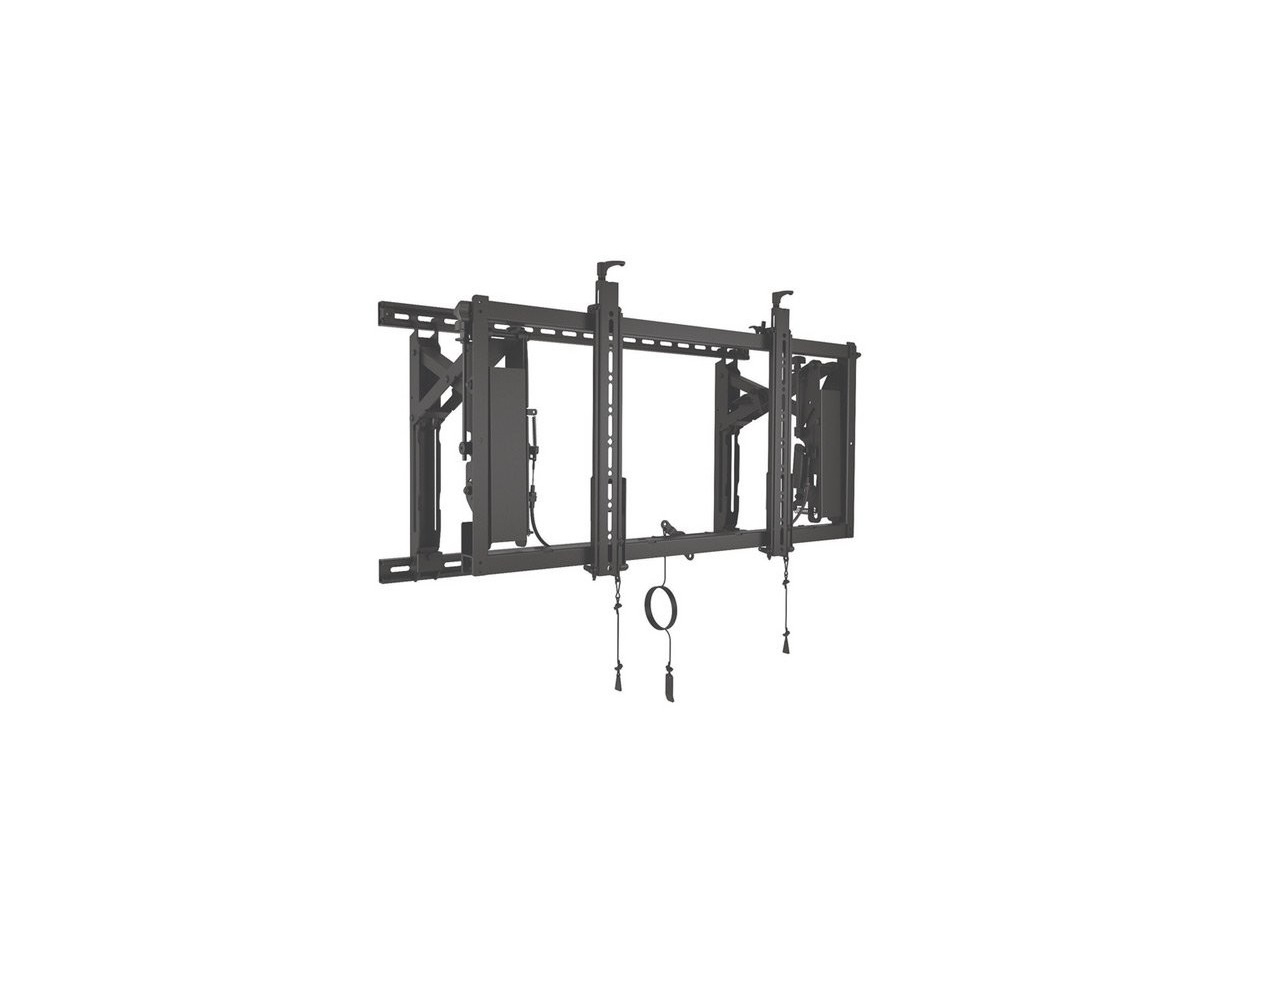 Chief Connexsys Video Wall Landscape Mounting System With Rails 42- 80 Screens Up To 150 LBS Black LVS1U